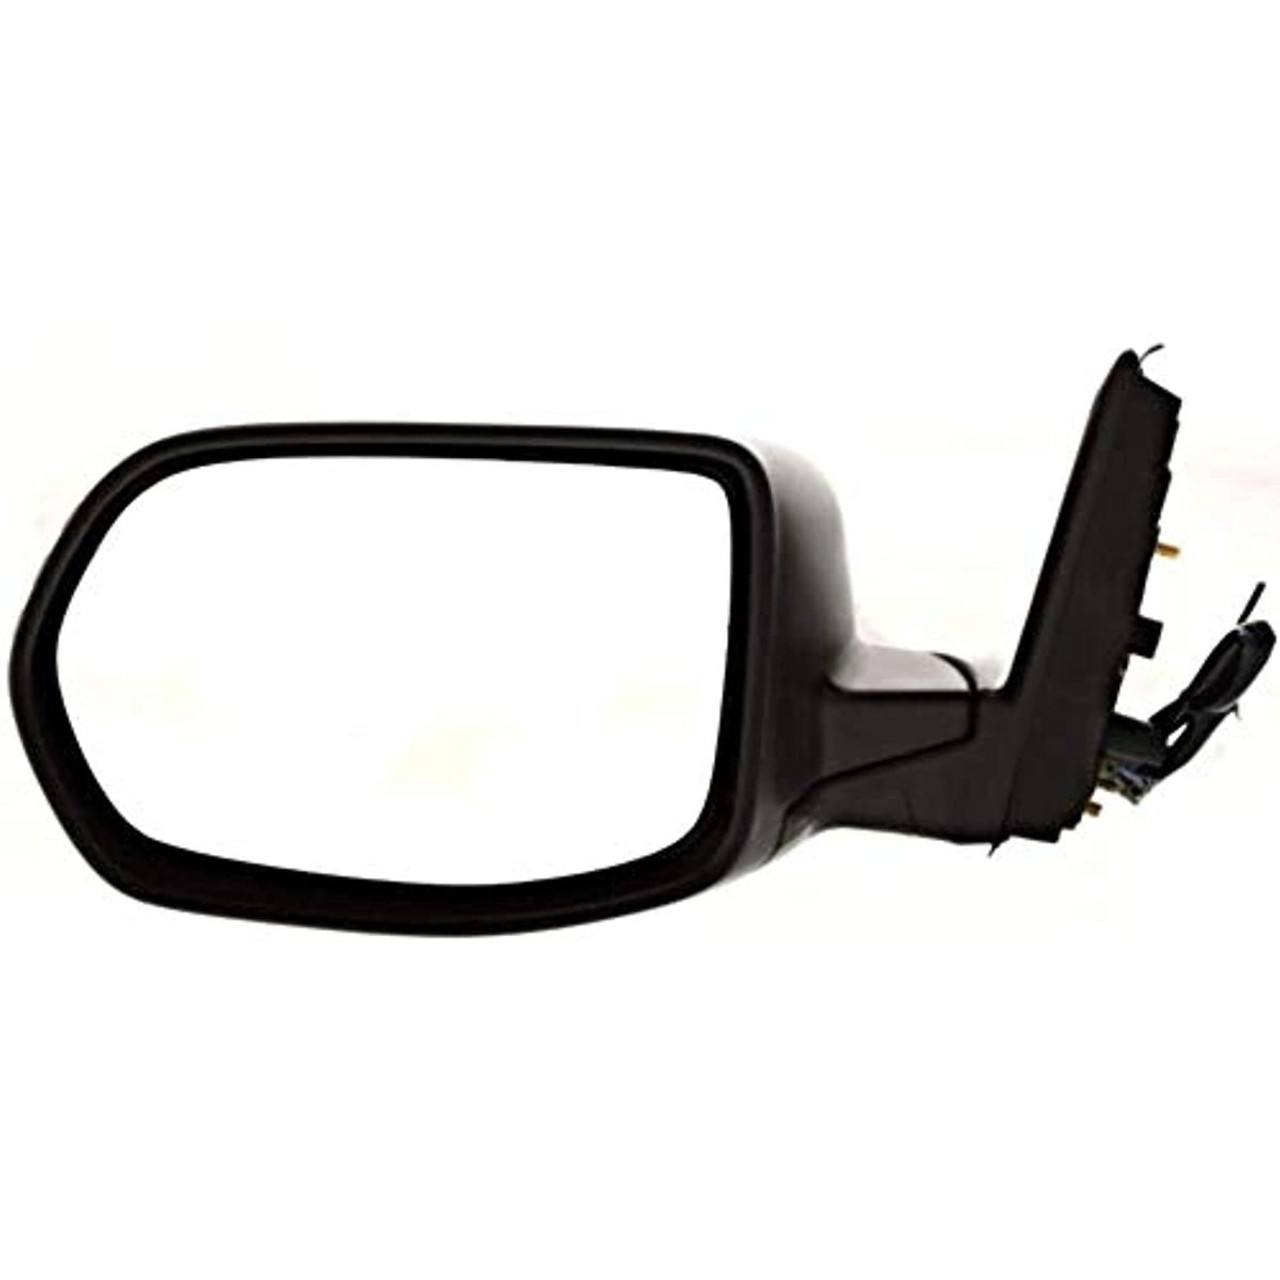 Fits 07-11 CR-V Left Driver Power Mirror Unpainted Without Heat